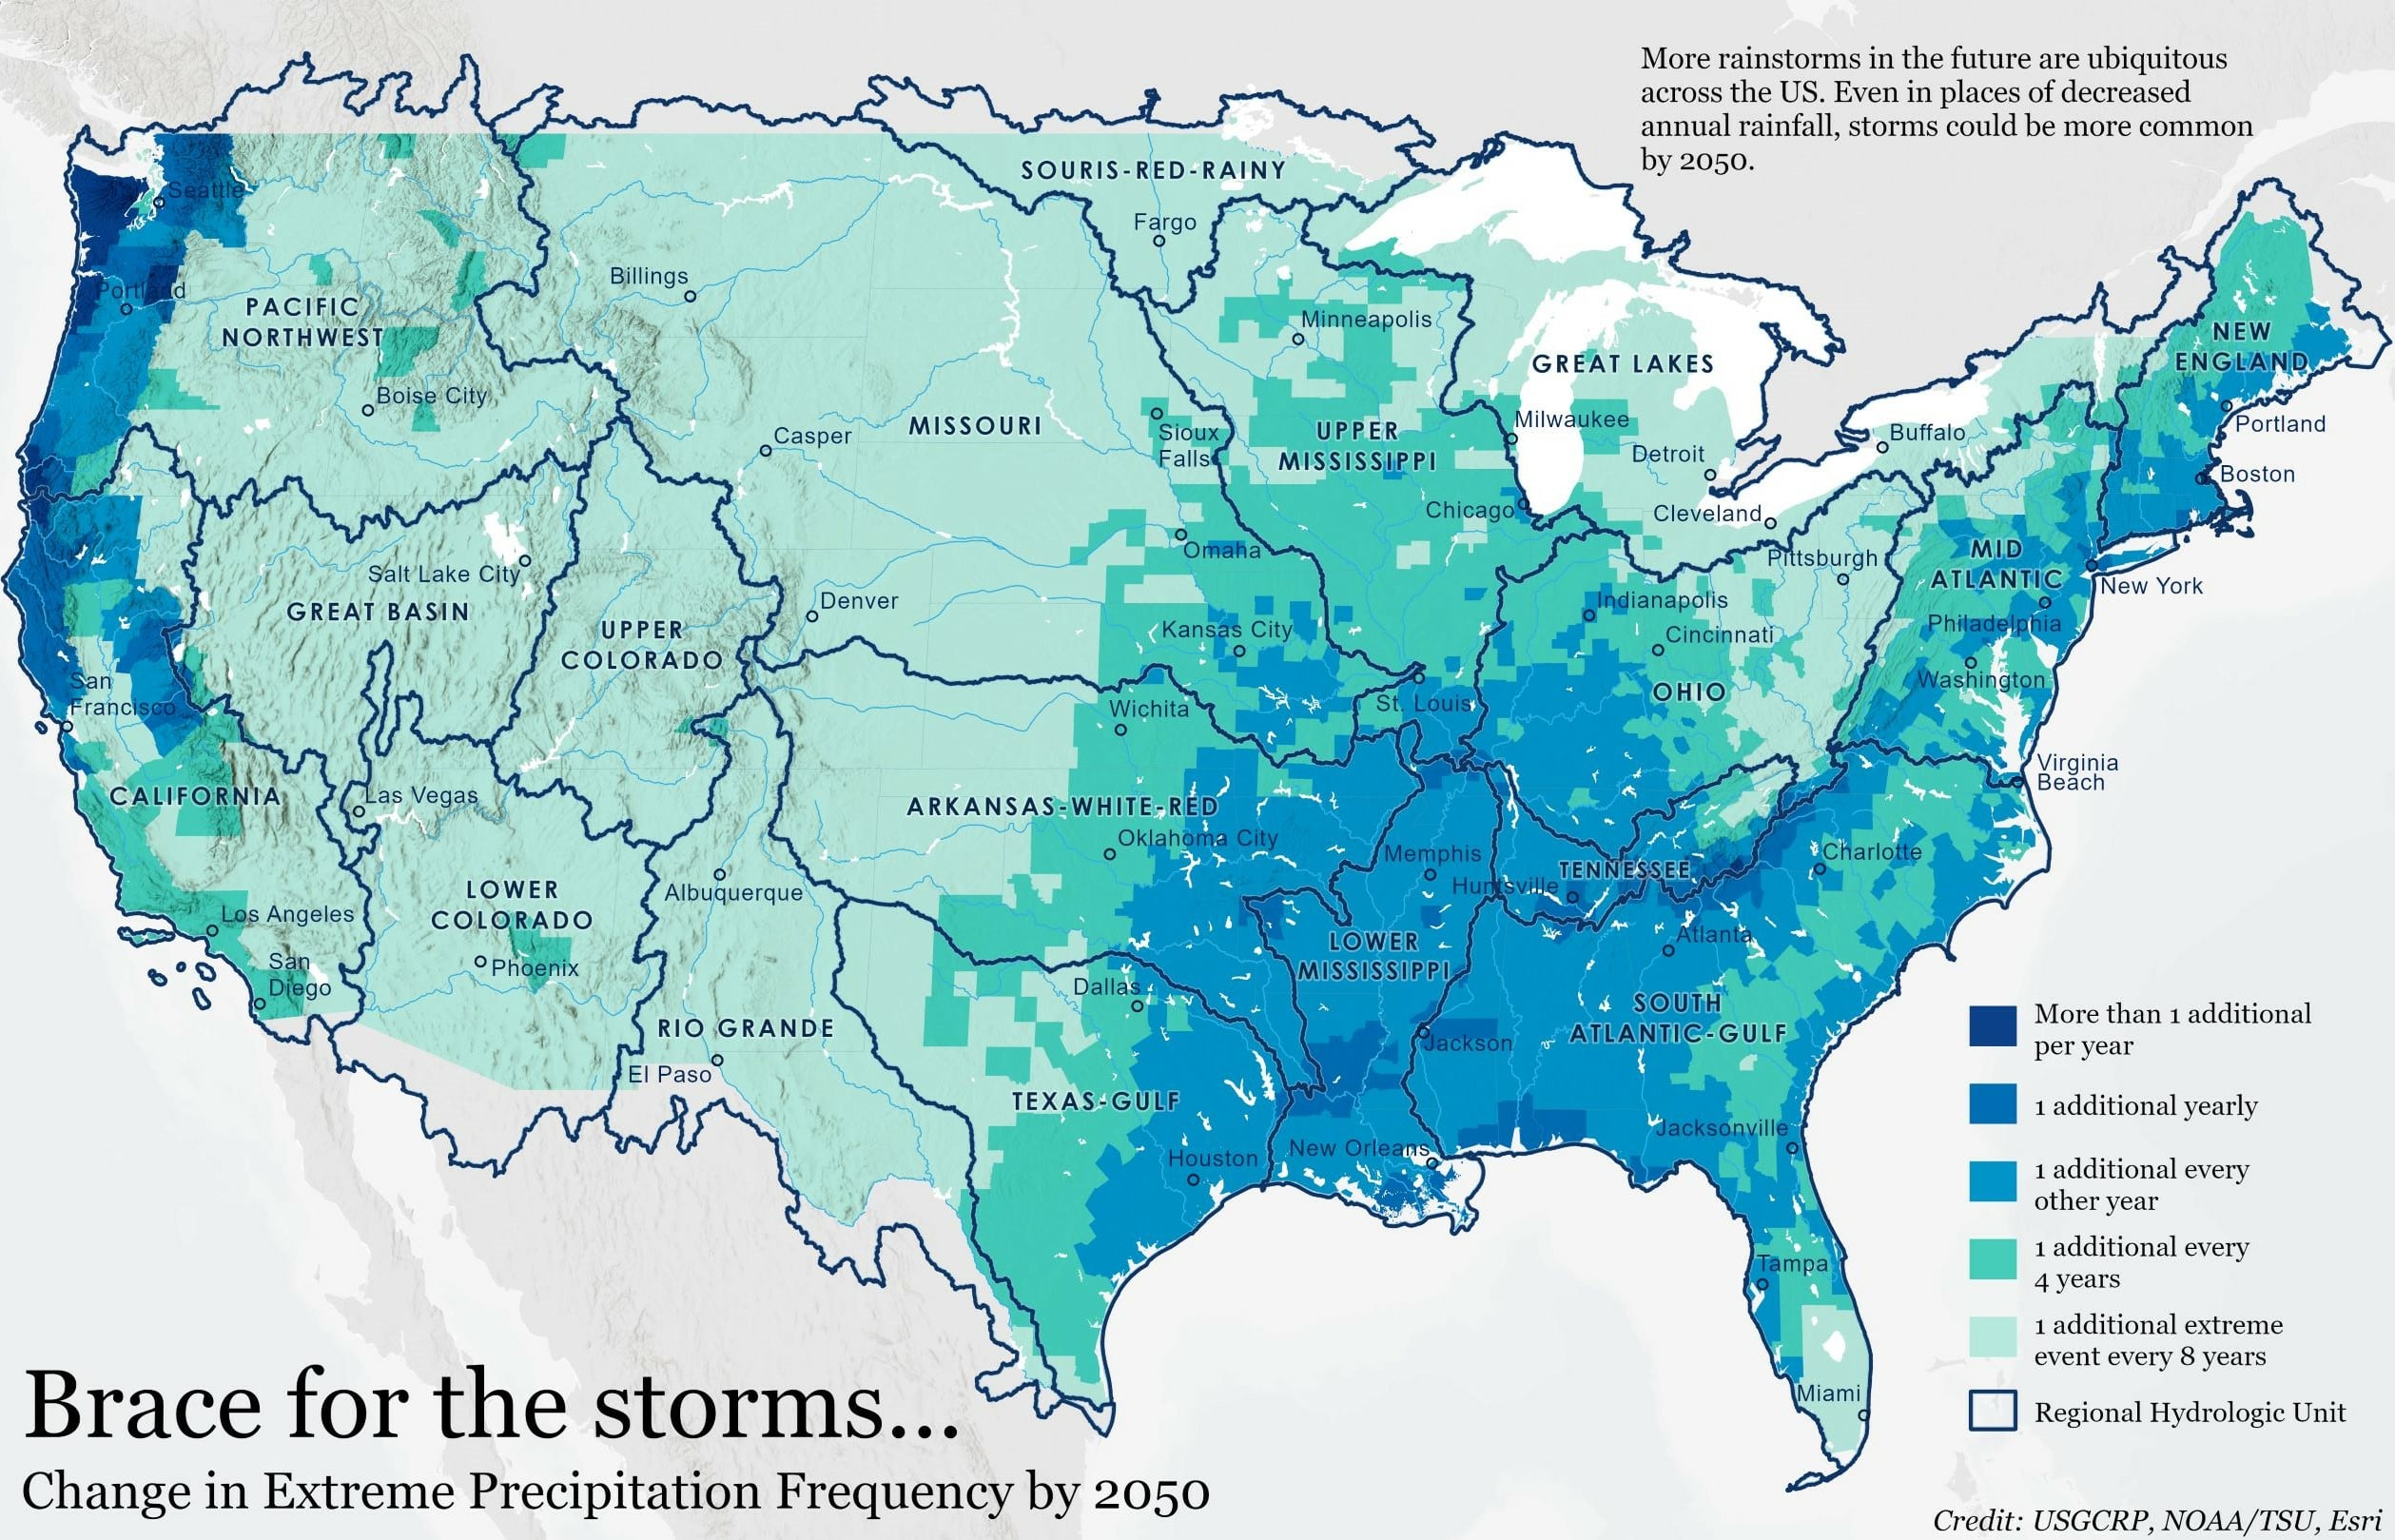 LOCA data shows that the frequency of extreme storms could increase across the entirety of the lower 48 states by midcentury. Extreme storms are defined as those with more than 2 inches of accumulation. Even areas with predicted decreases in annual rainfall could see more frequent storms. Greatest increases in storm frequency can be found along the Pacific Northwest coast.